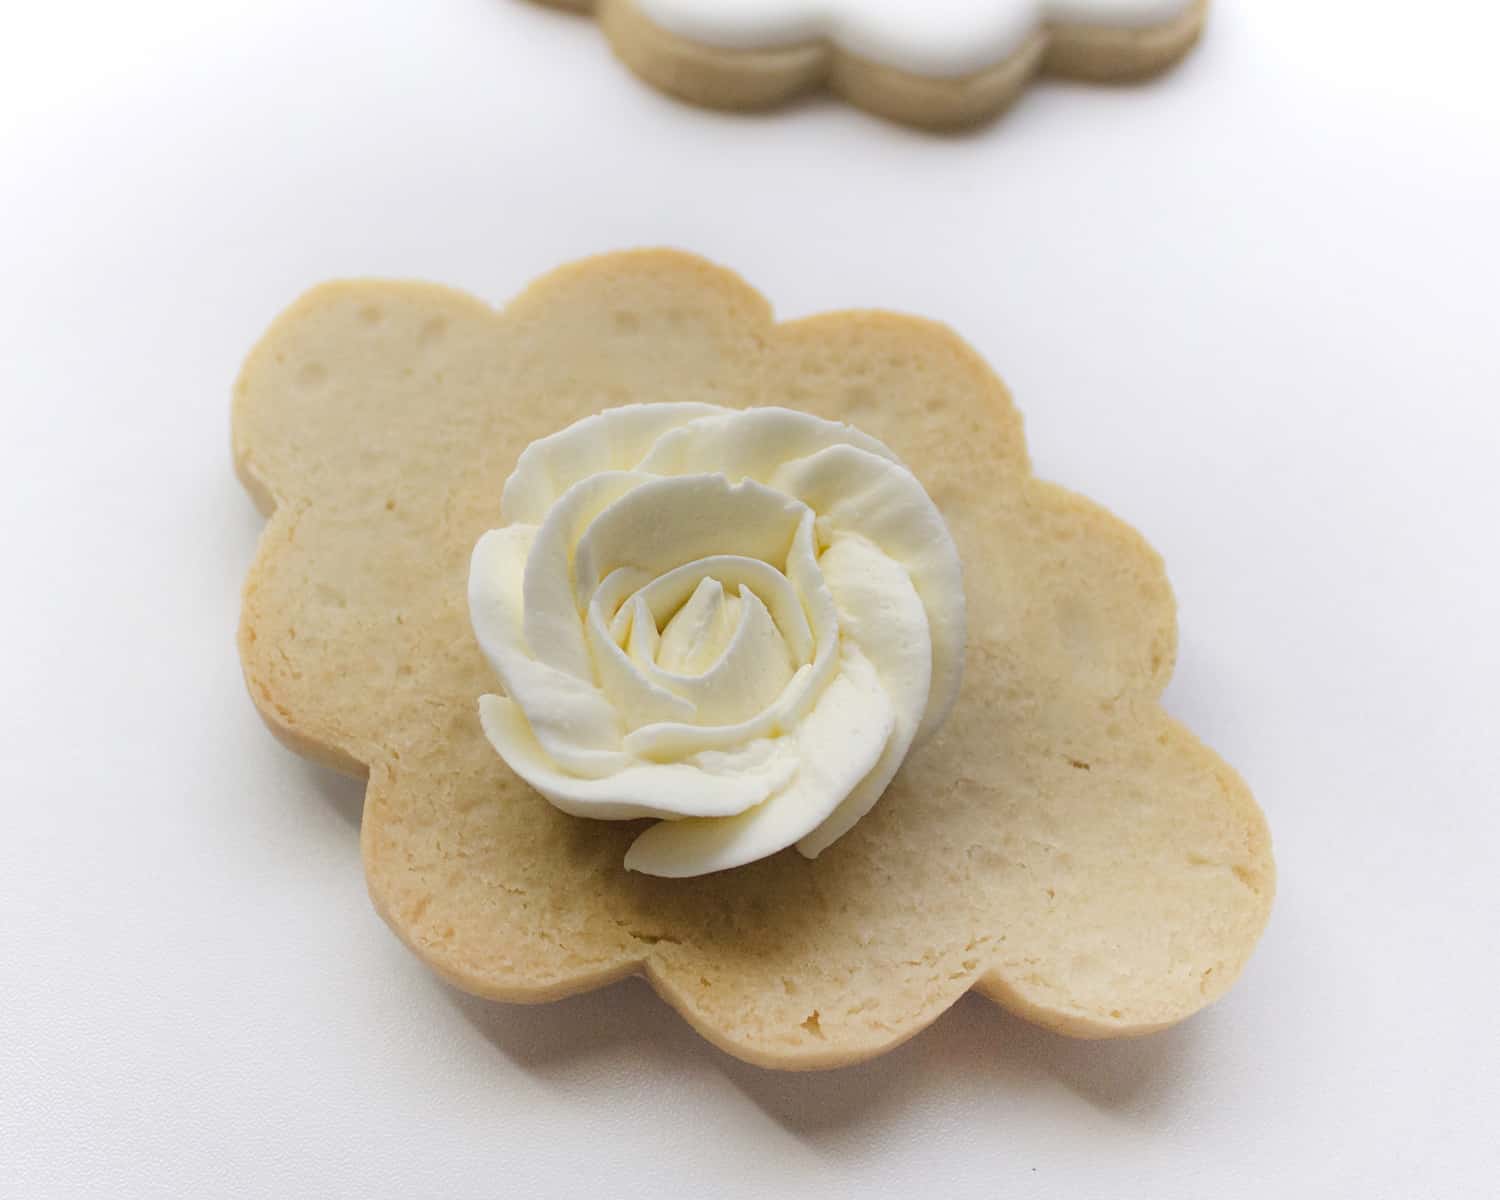 Making a flower shape with icing on a cookie